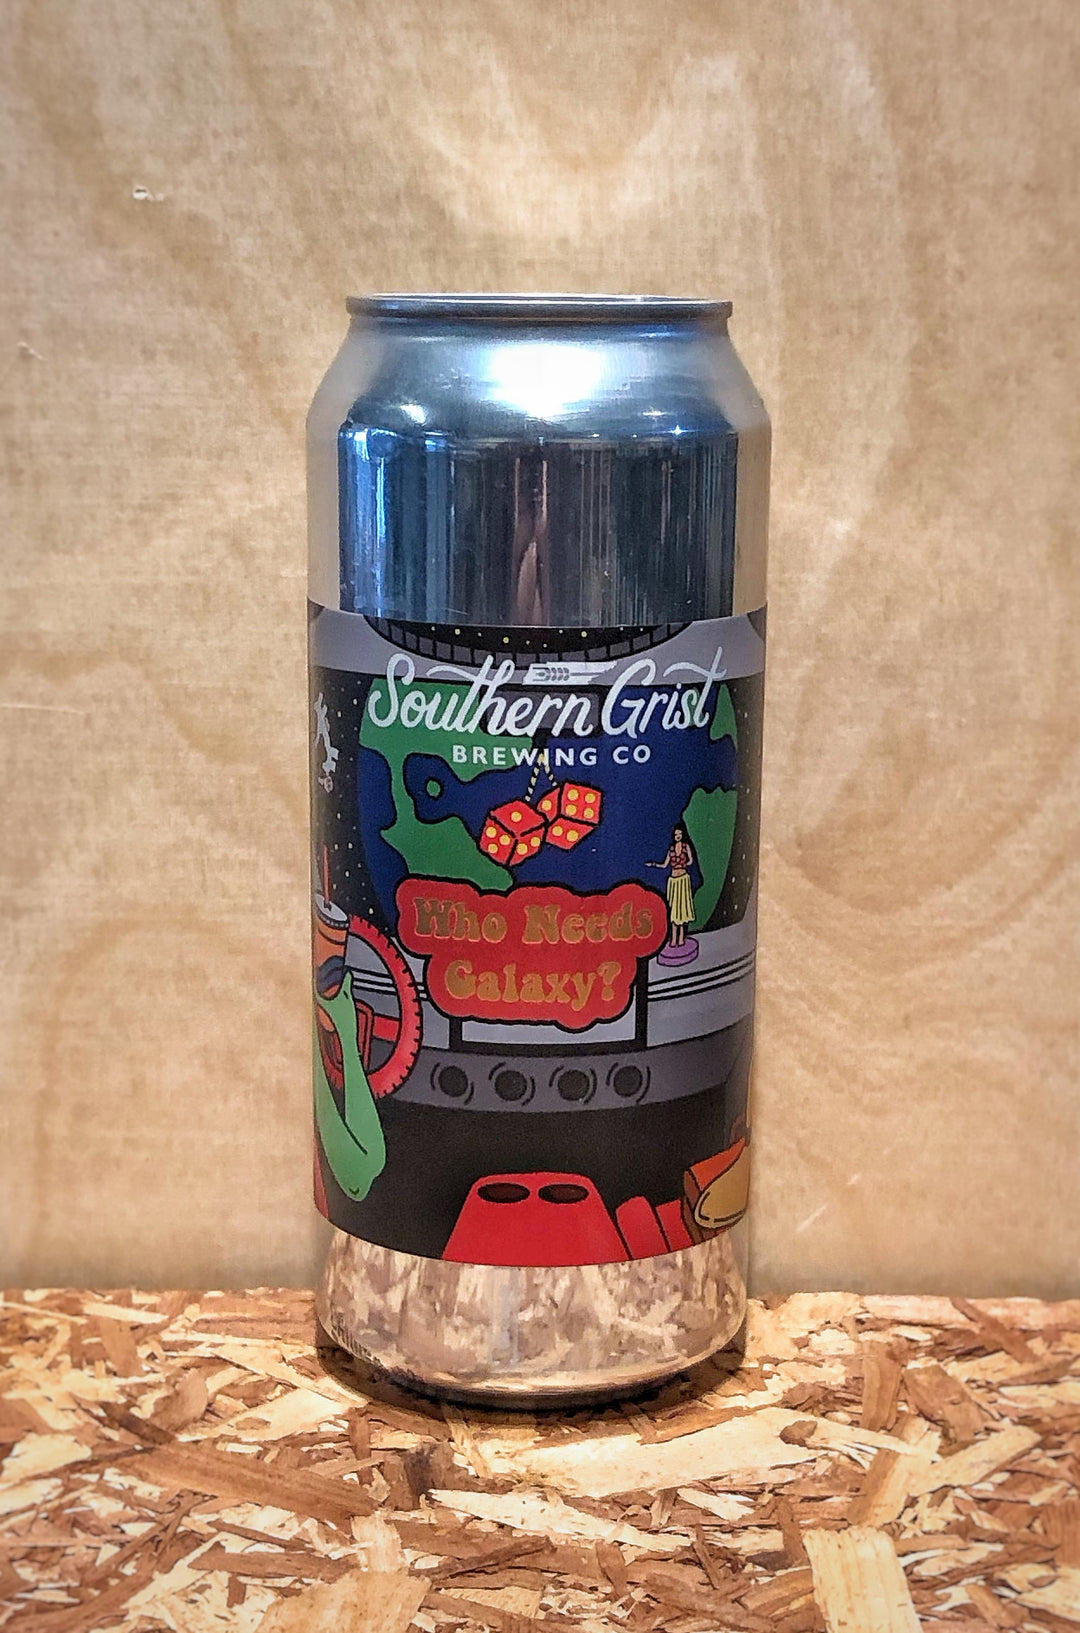 Southern Grist Brewing Co. 'Who Needs Galaxy?' New England Style Double IPA (Nashville, TN)